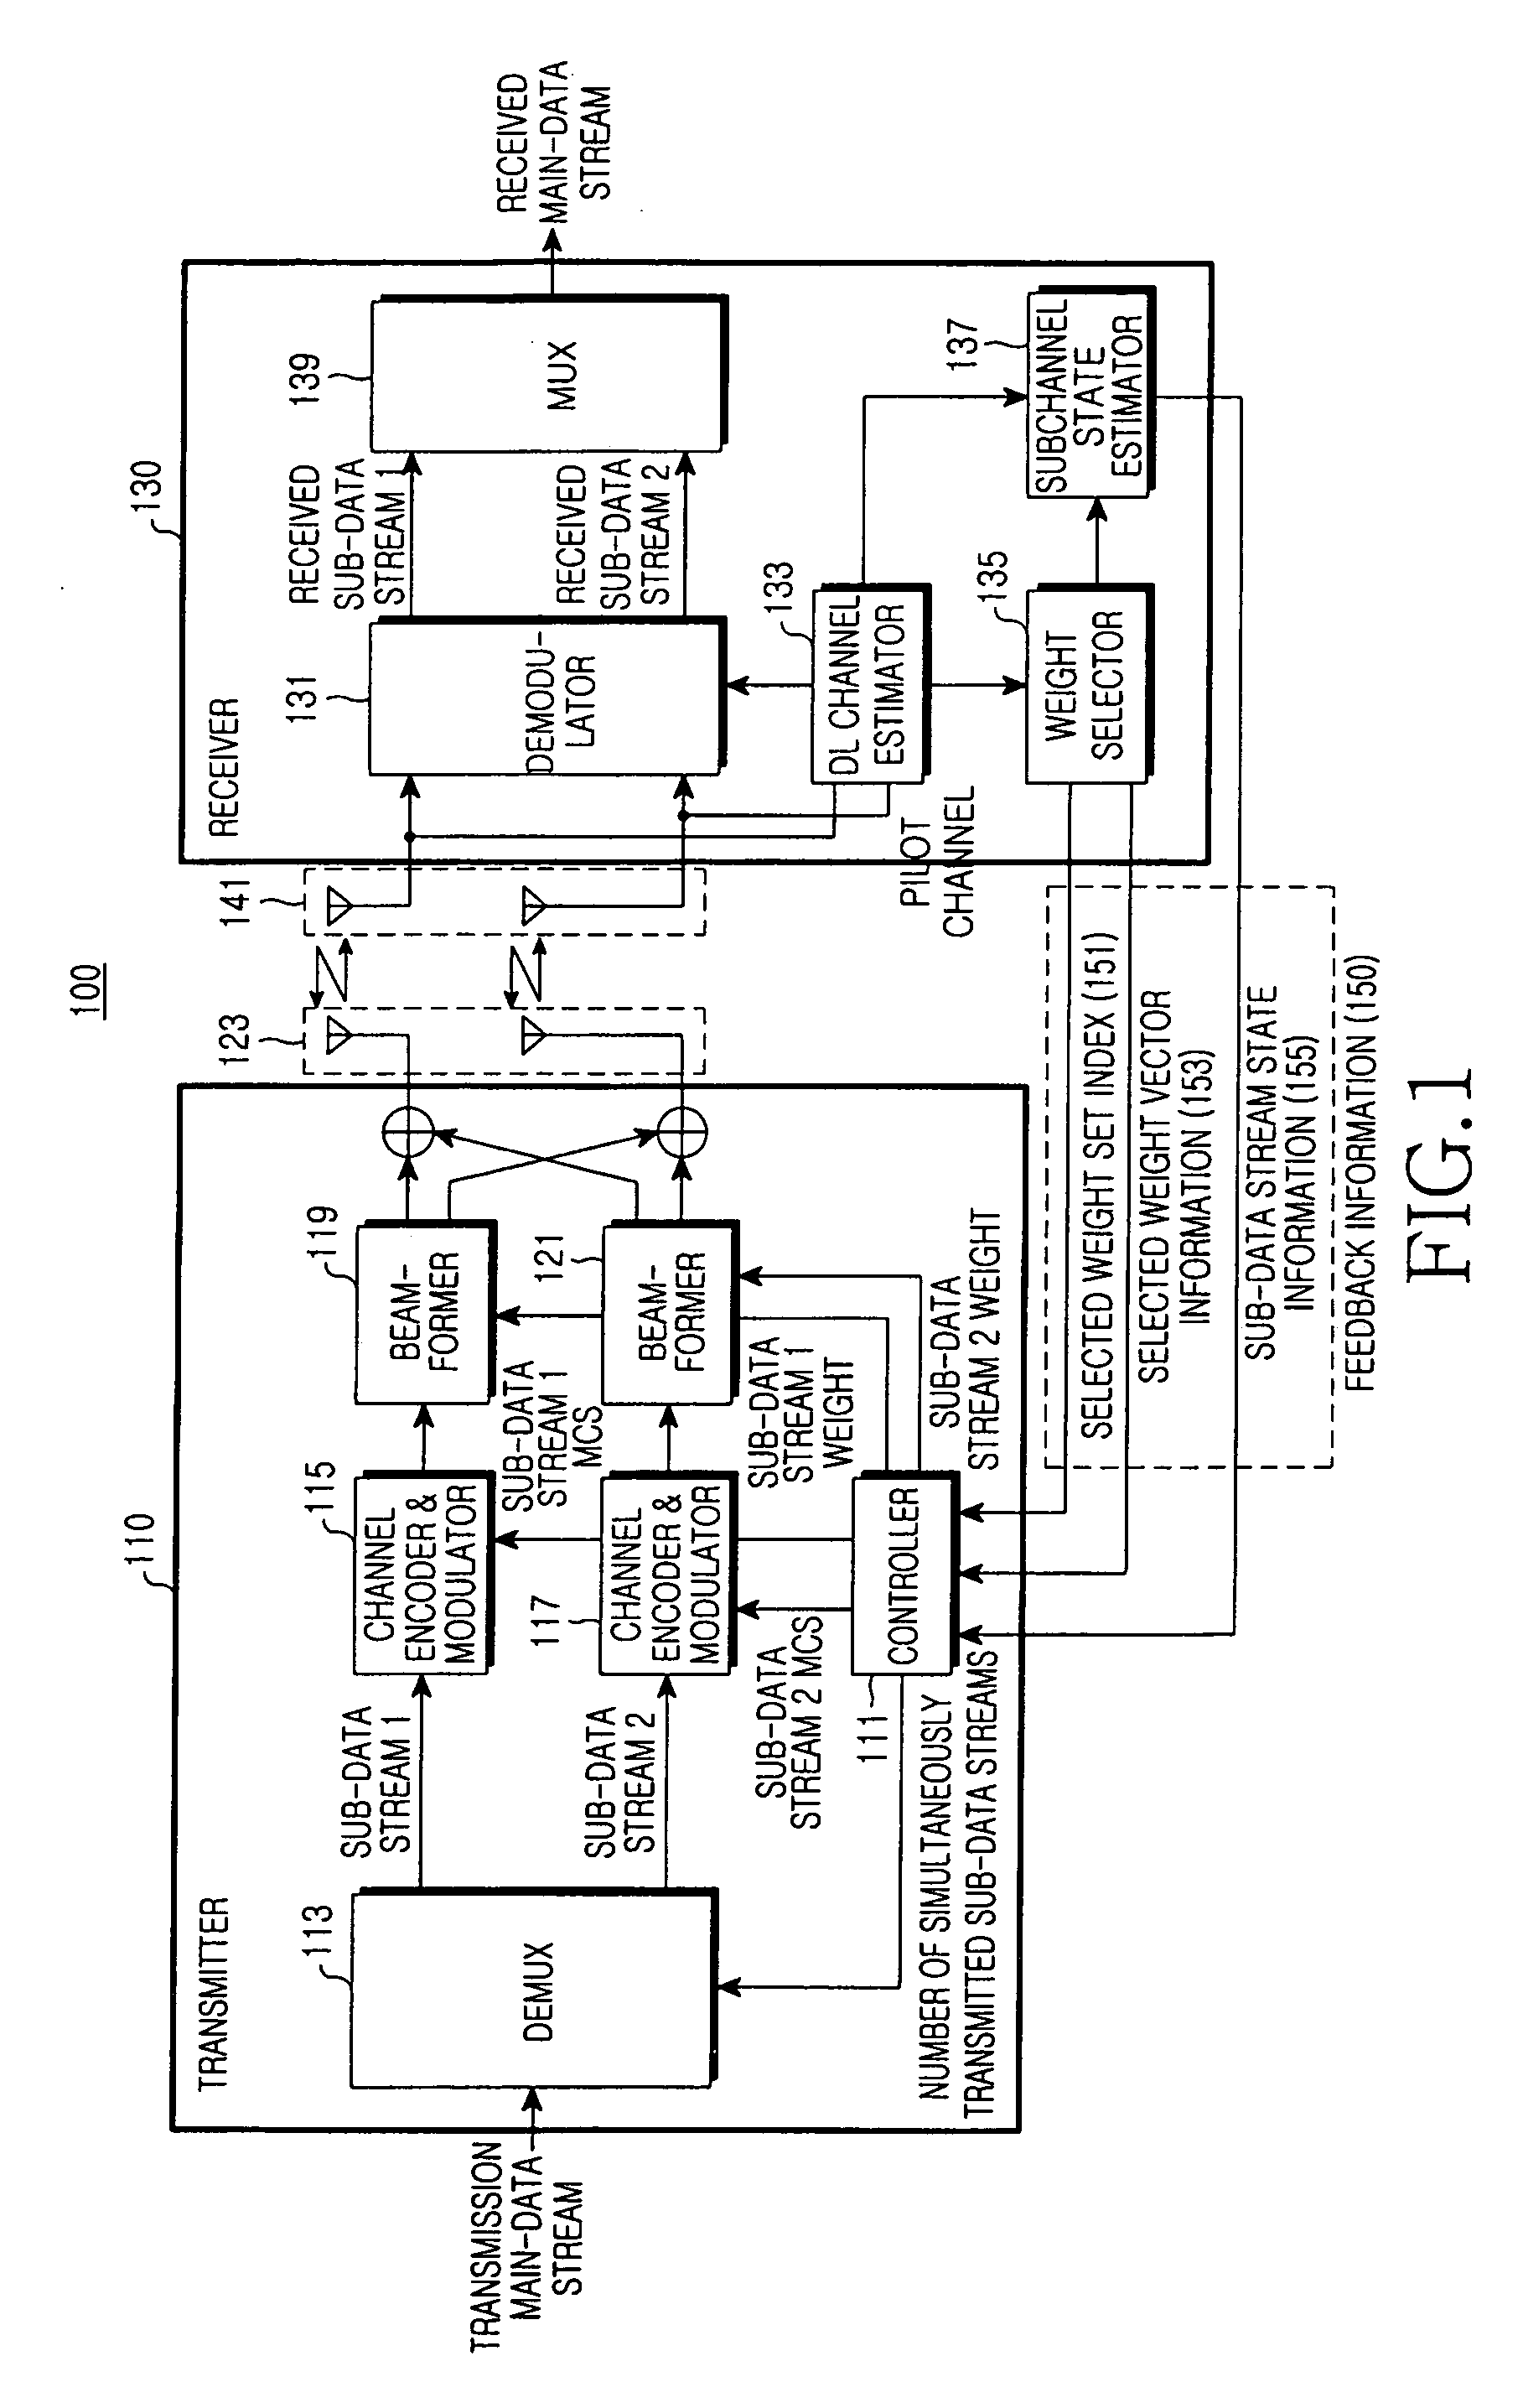 Apparatus and method for transmitting/receiving feedback information in a mobile communication system using array antennas